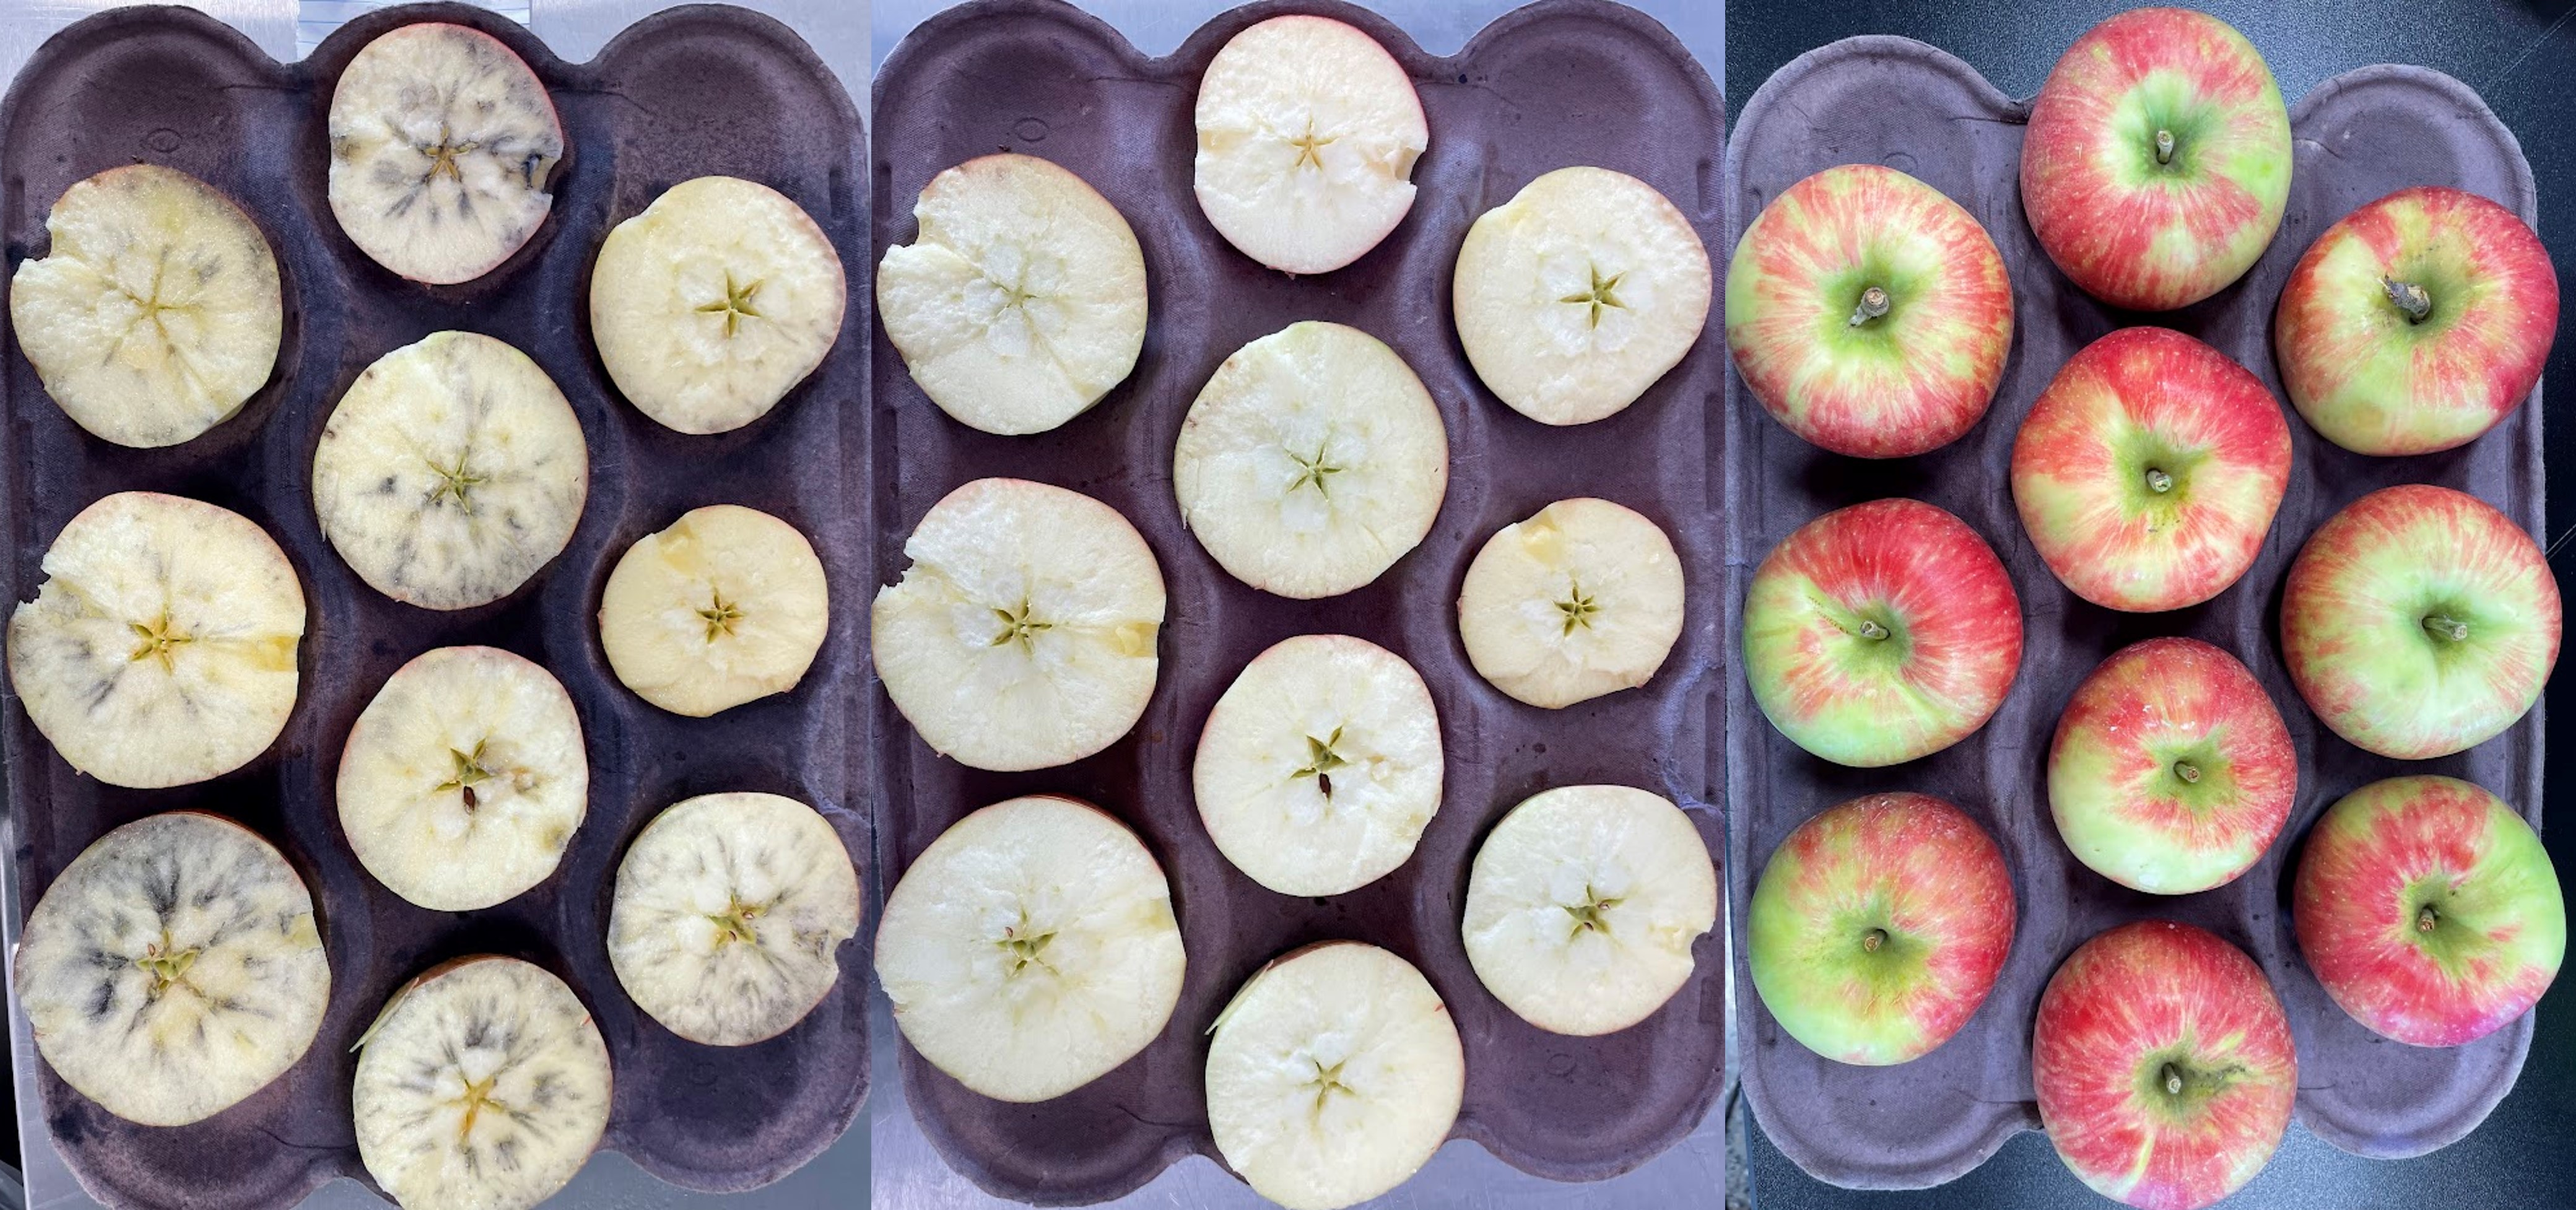 Apple maturity testing and starch staining of Premier Honeycrisp.